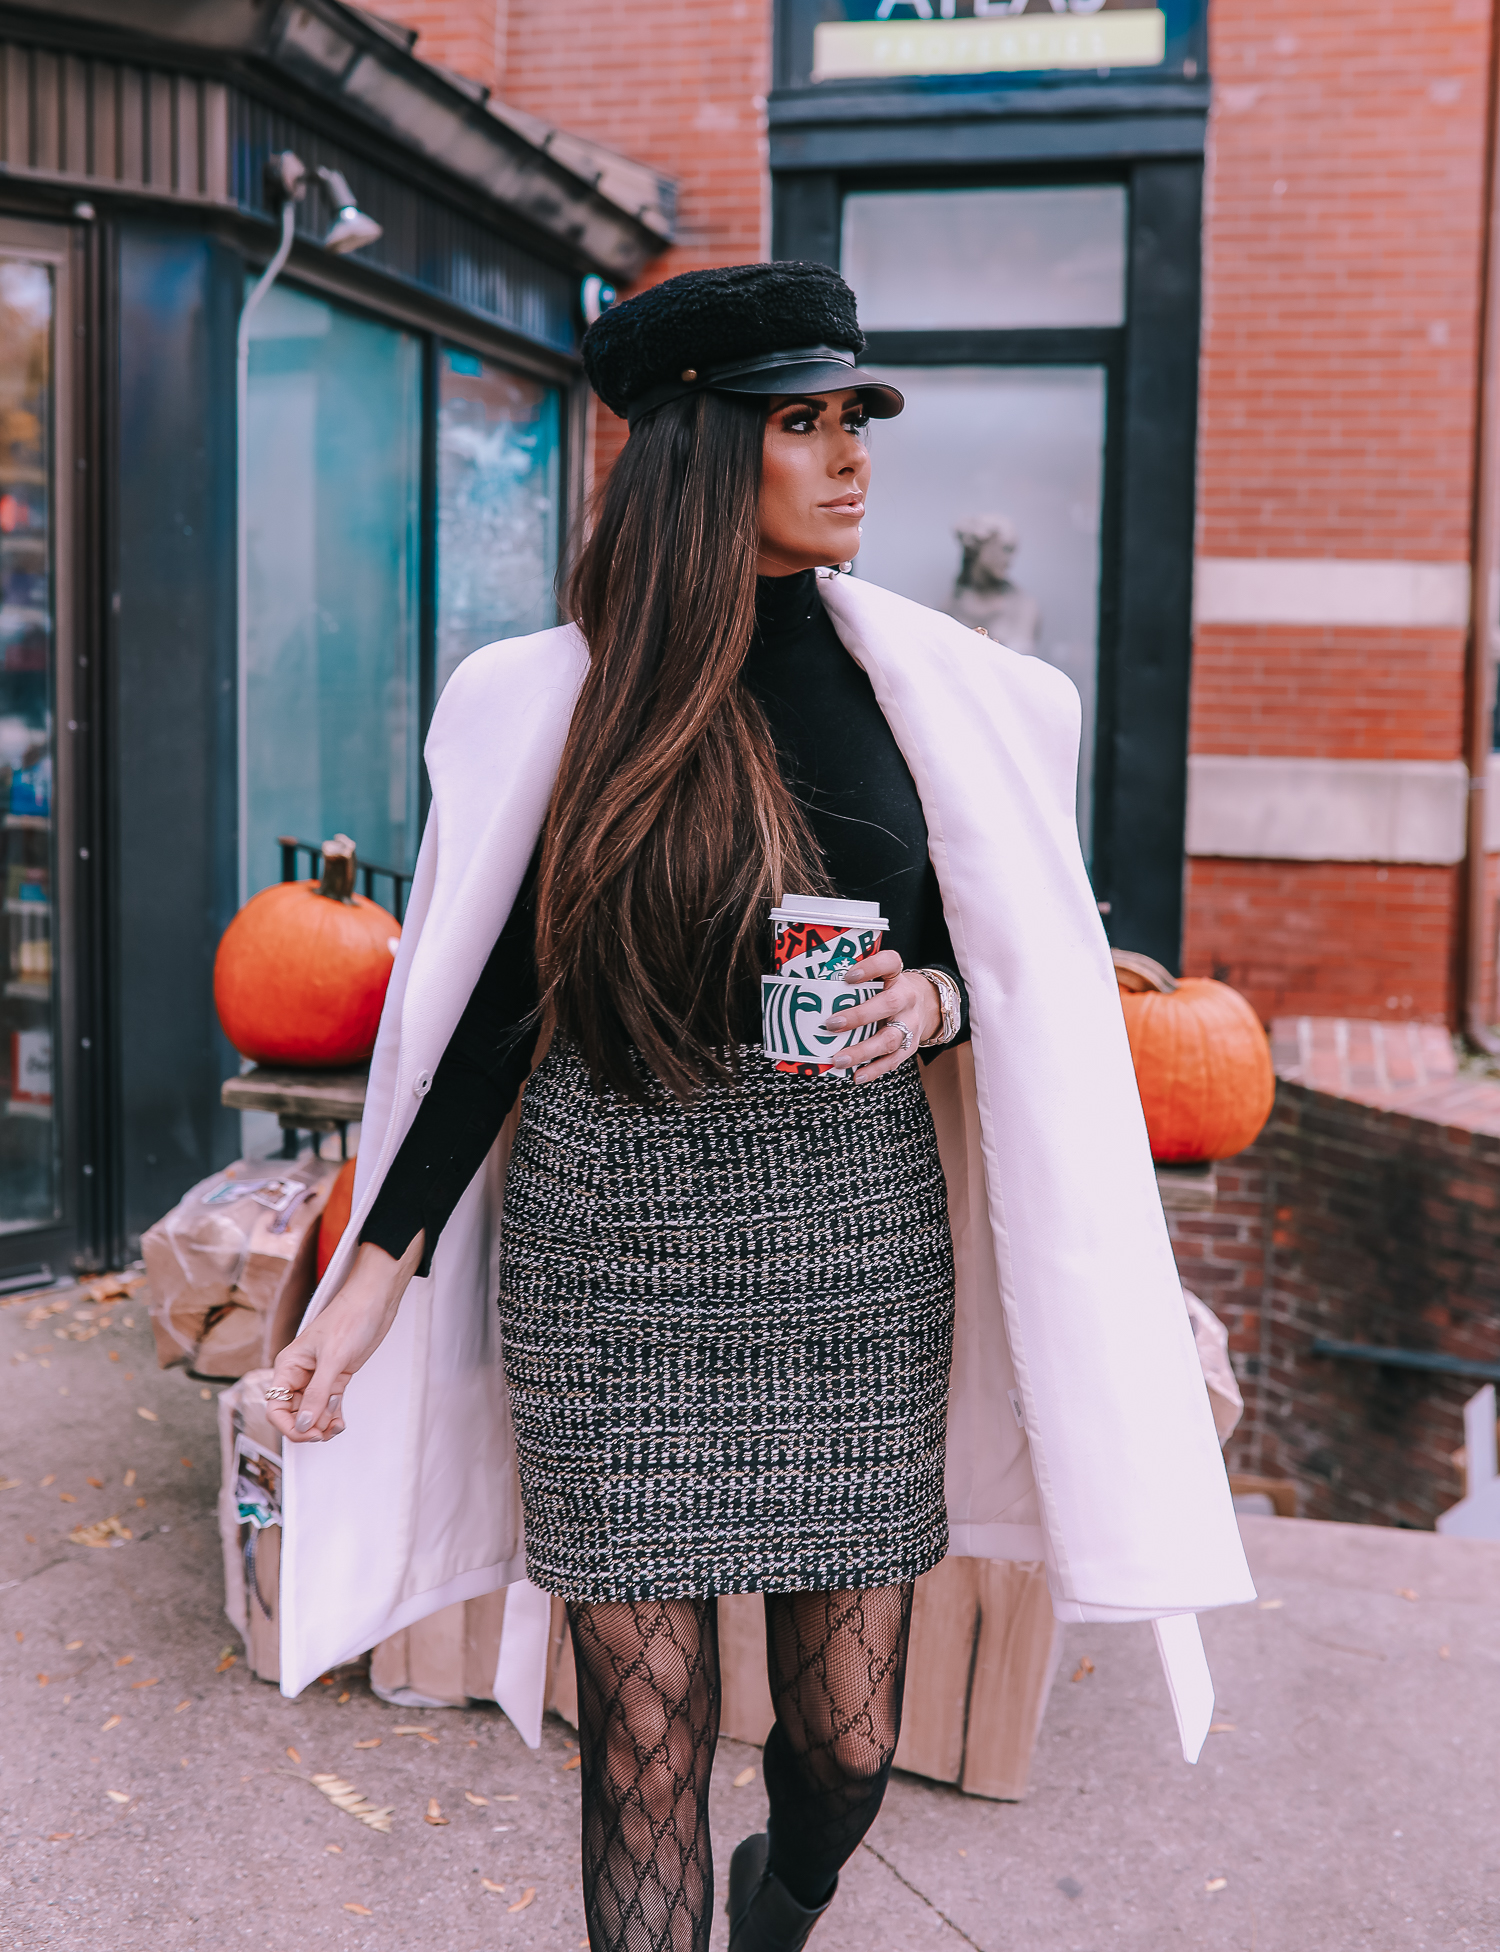 Most Popular Outfits On Sale That I've Worn - All 50% Off! by popular Oklahoma fashion blog, The Sweetest Thing: image of a woman wearing a white wrap coat and tweed skirt.